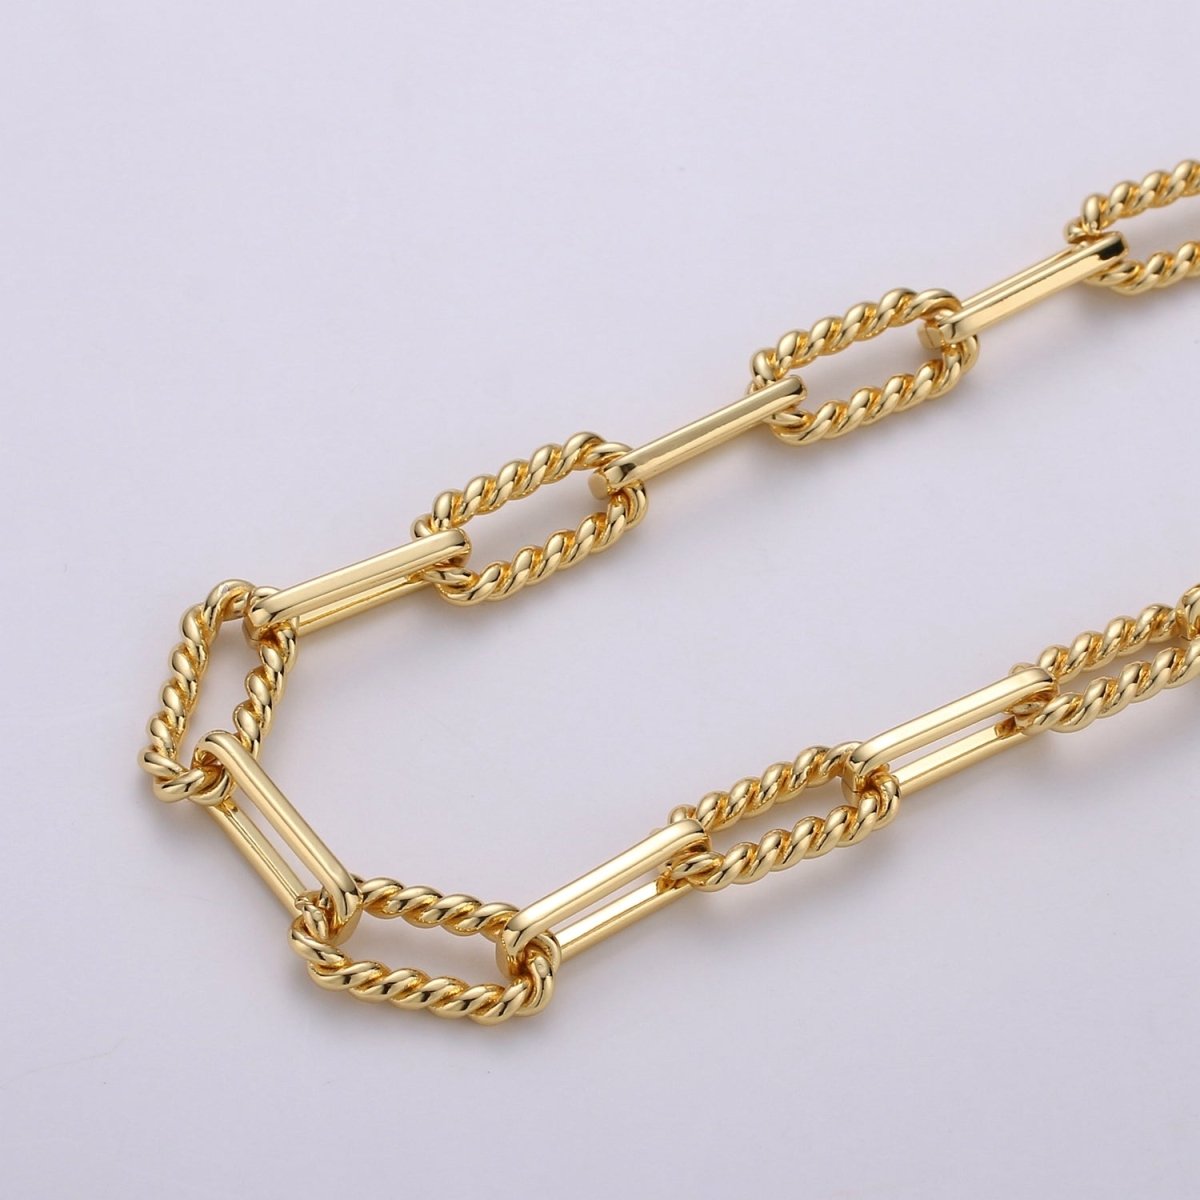 24K Gold Filled 2.5mm Thickness Twisted UNIQUE PAPER CLIP Chain By Yard, Gold Filled Rolo Cable Chain Thickness 2mm | ROLL-279, ROLL-280 Clearance Pricing - DLUXCA